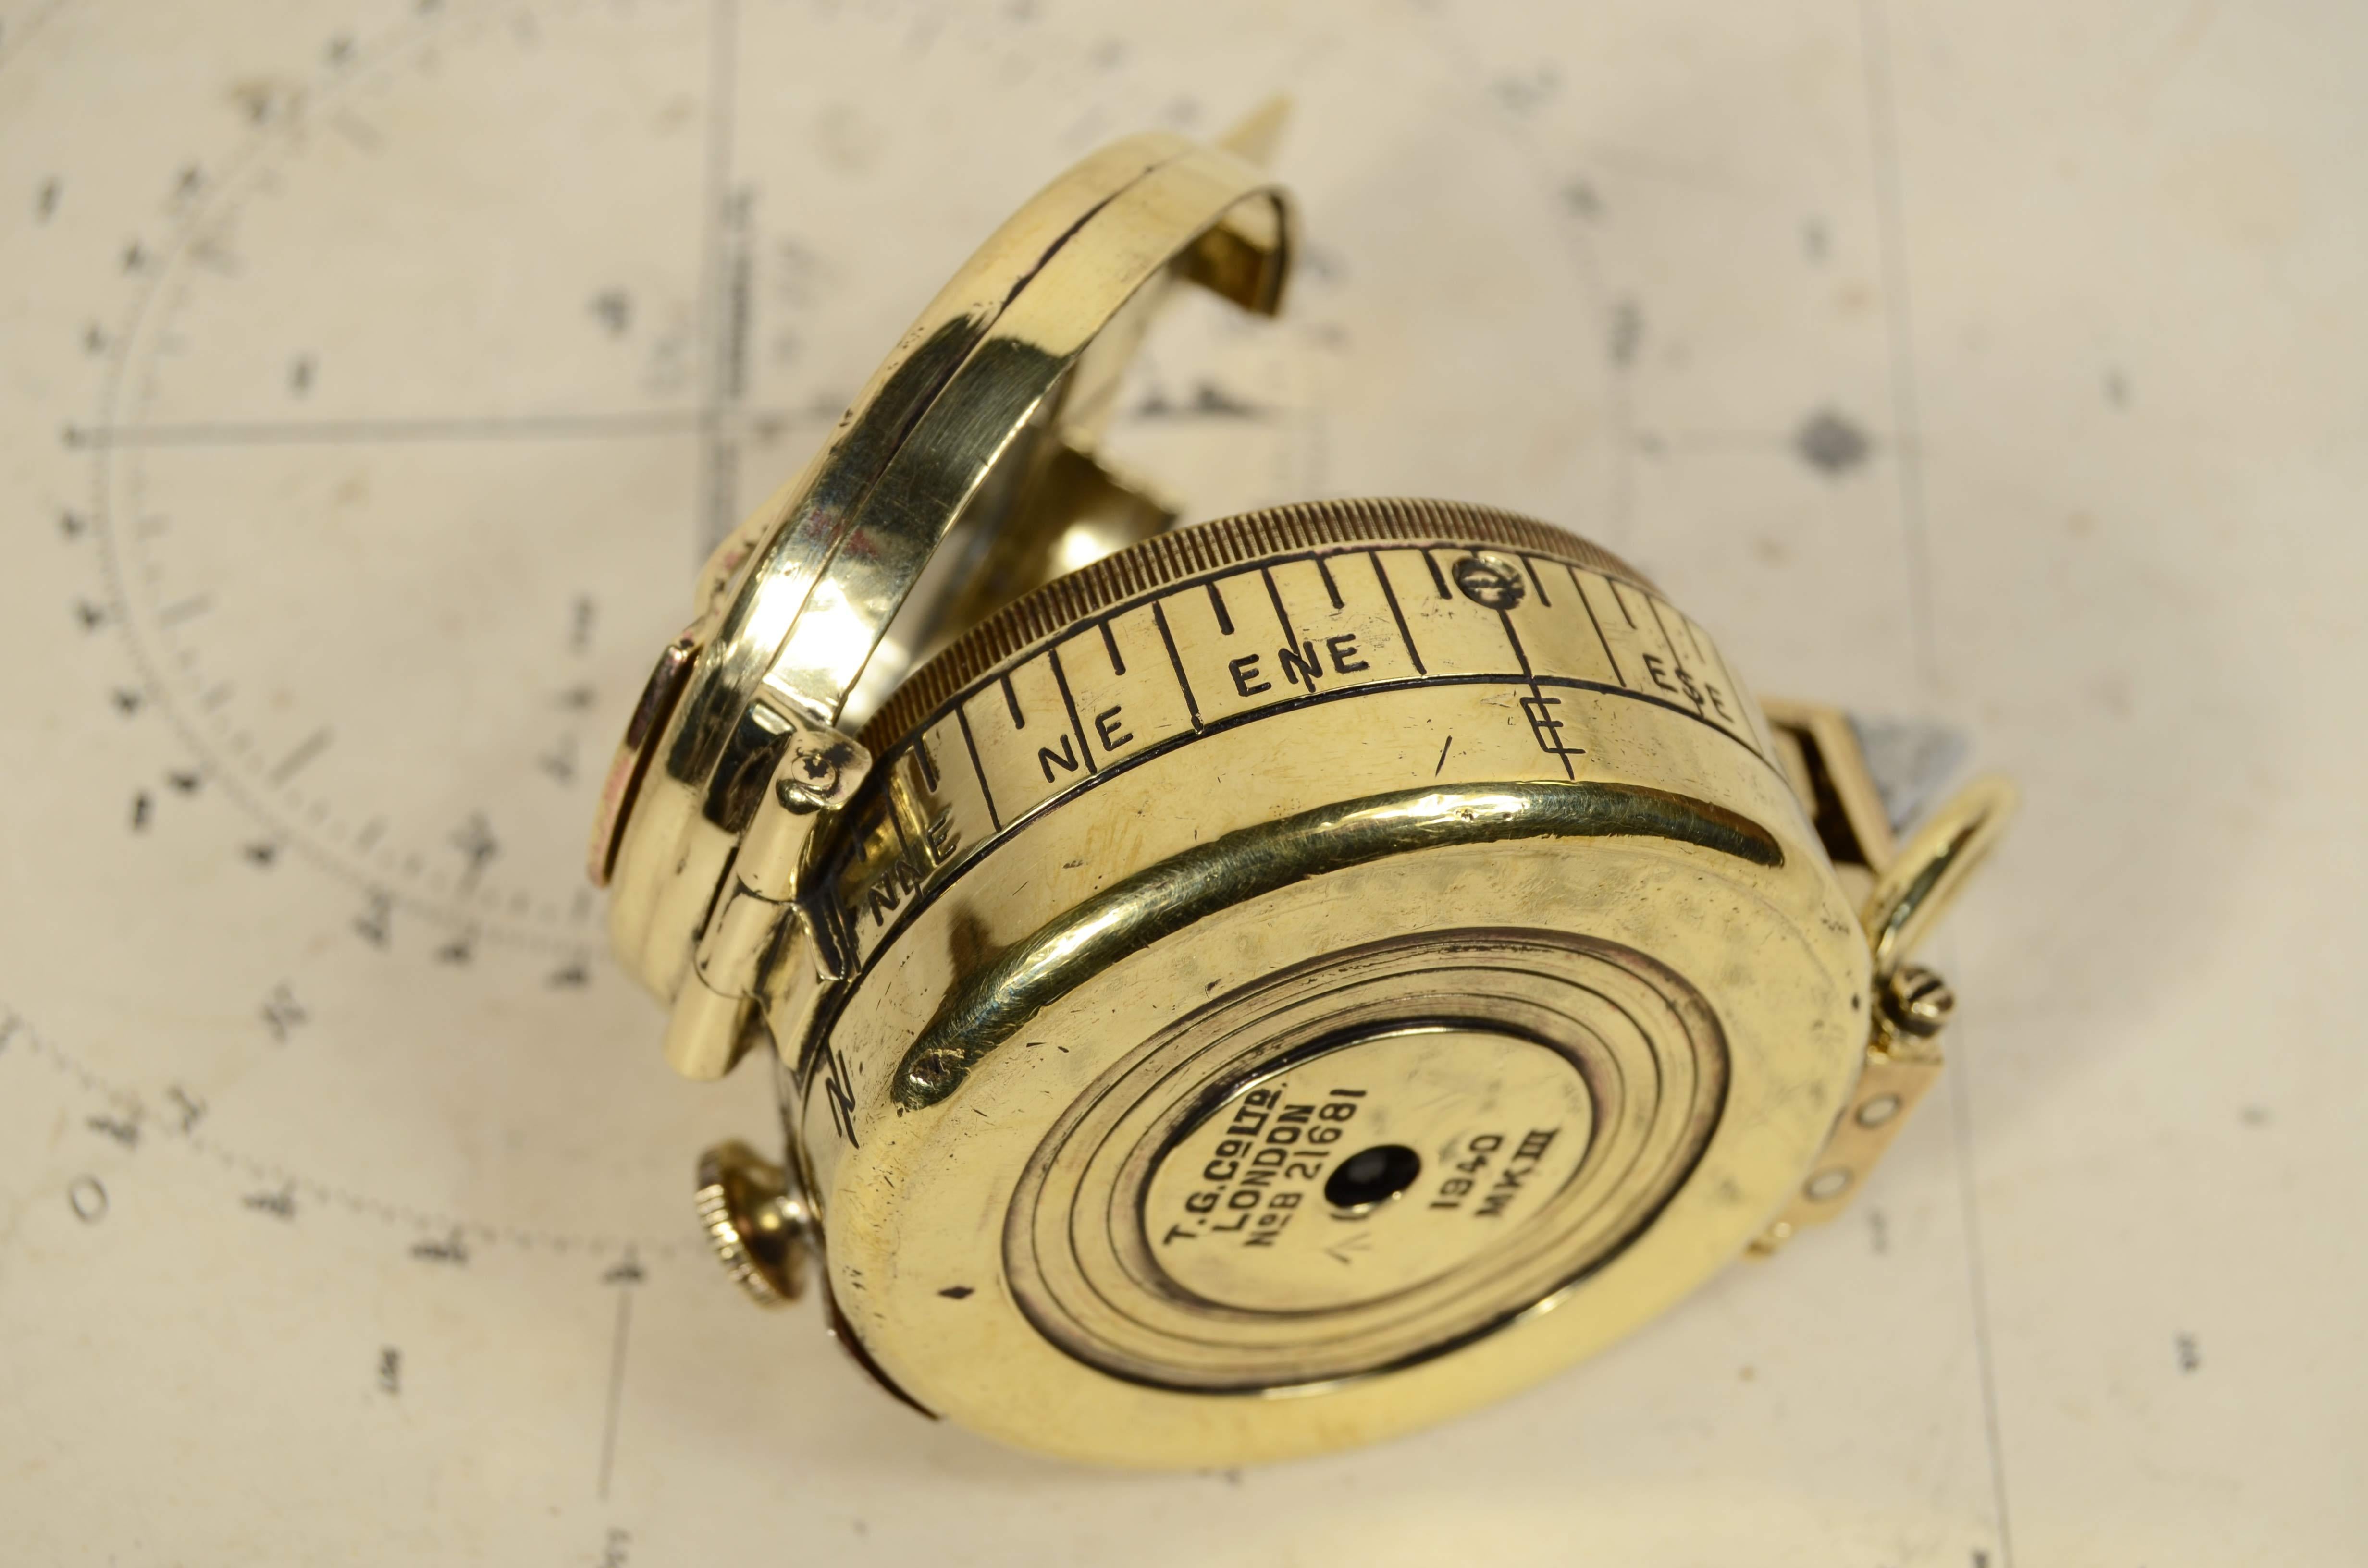 Mid-20th Century Prismatic compass  by detection signed T.G. Co Ltd London no. B 21681 1940 MK For Sale